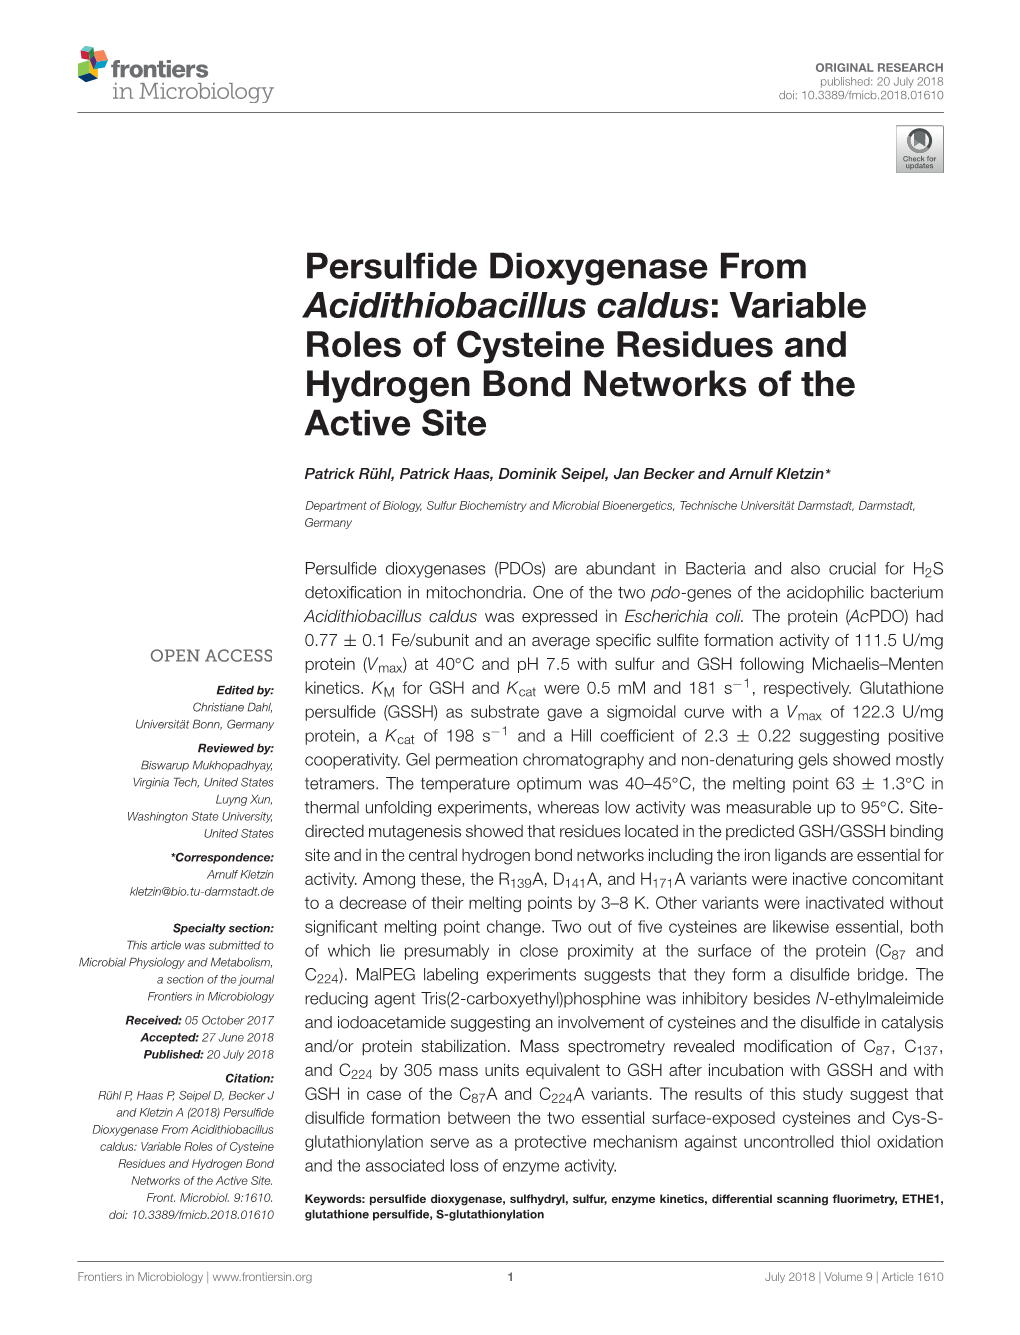 Persulfide Dioxygenase from Acidithiobacillus Caldus: Variable Roles of Cysteine Residues and Hydrogen Bond Networks of the Acti